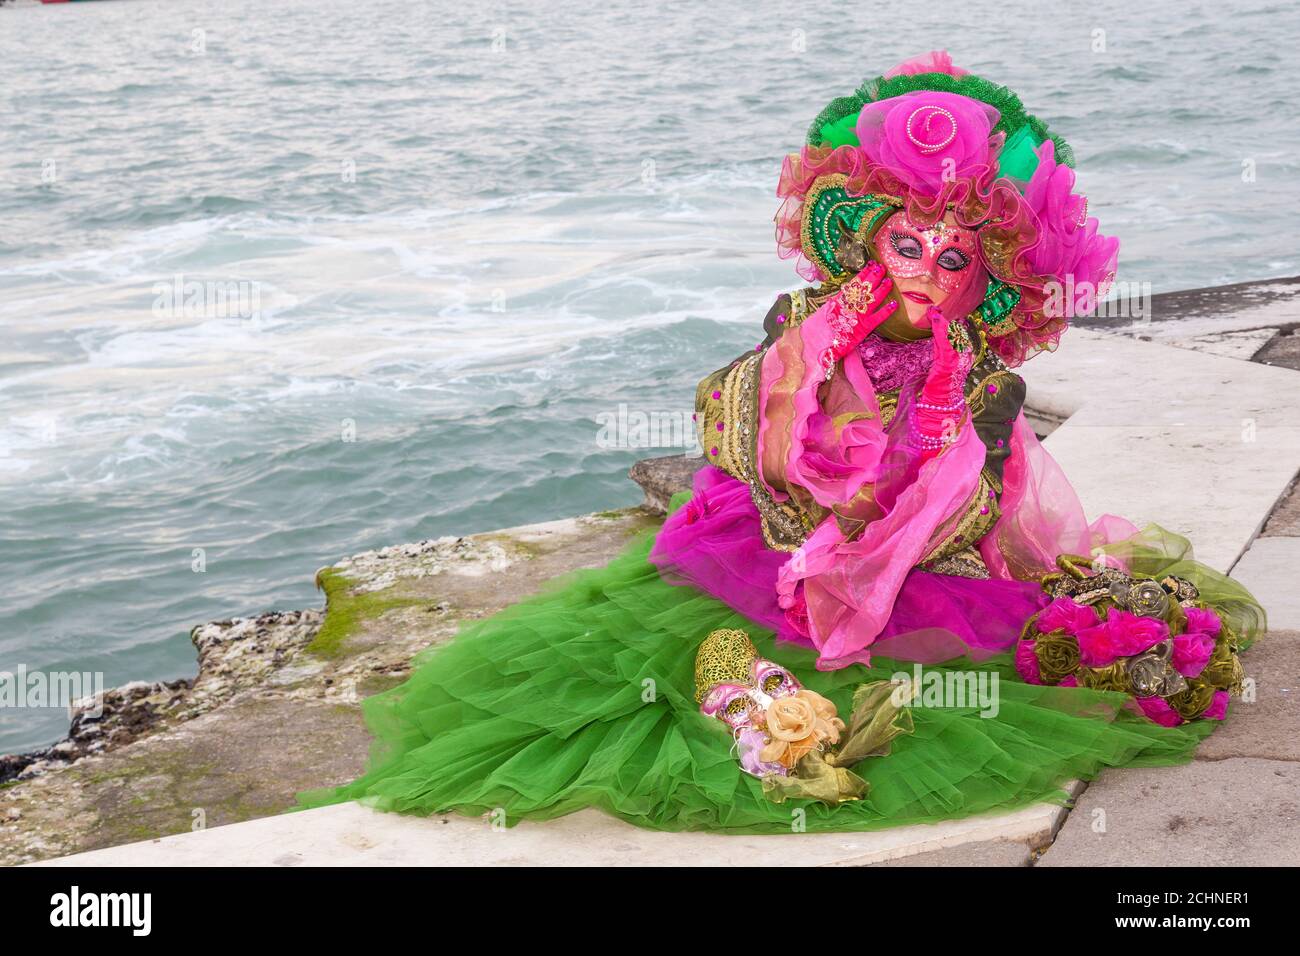 Venice, Veneto, Italy - woman in colorful green and pink costume posing at the edge of the water at the  lagoon at the Venice Carnival Stock Photo